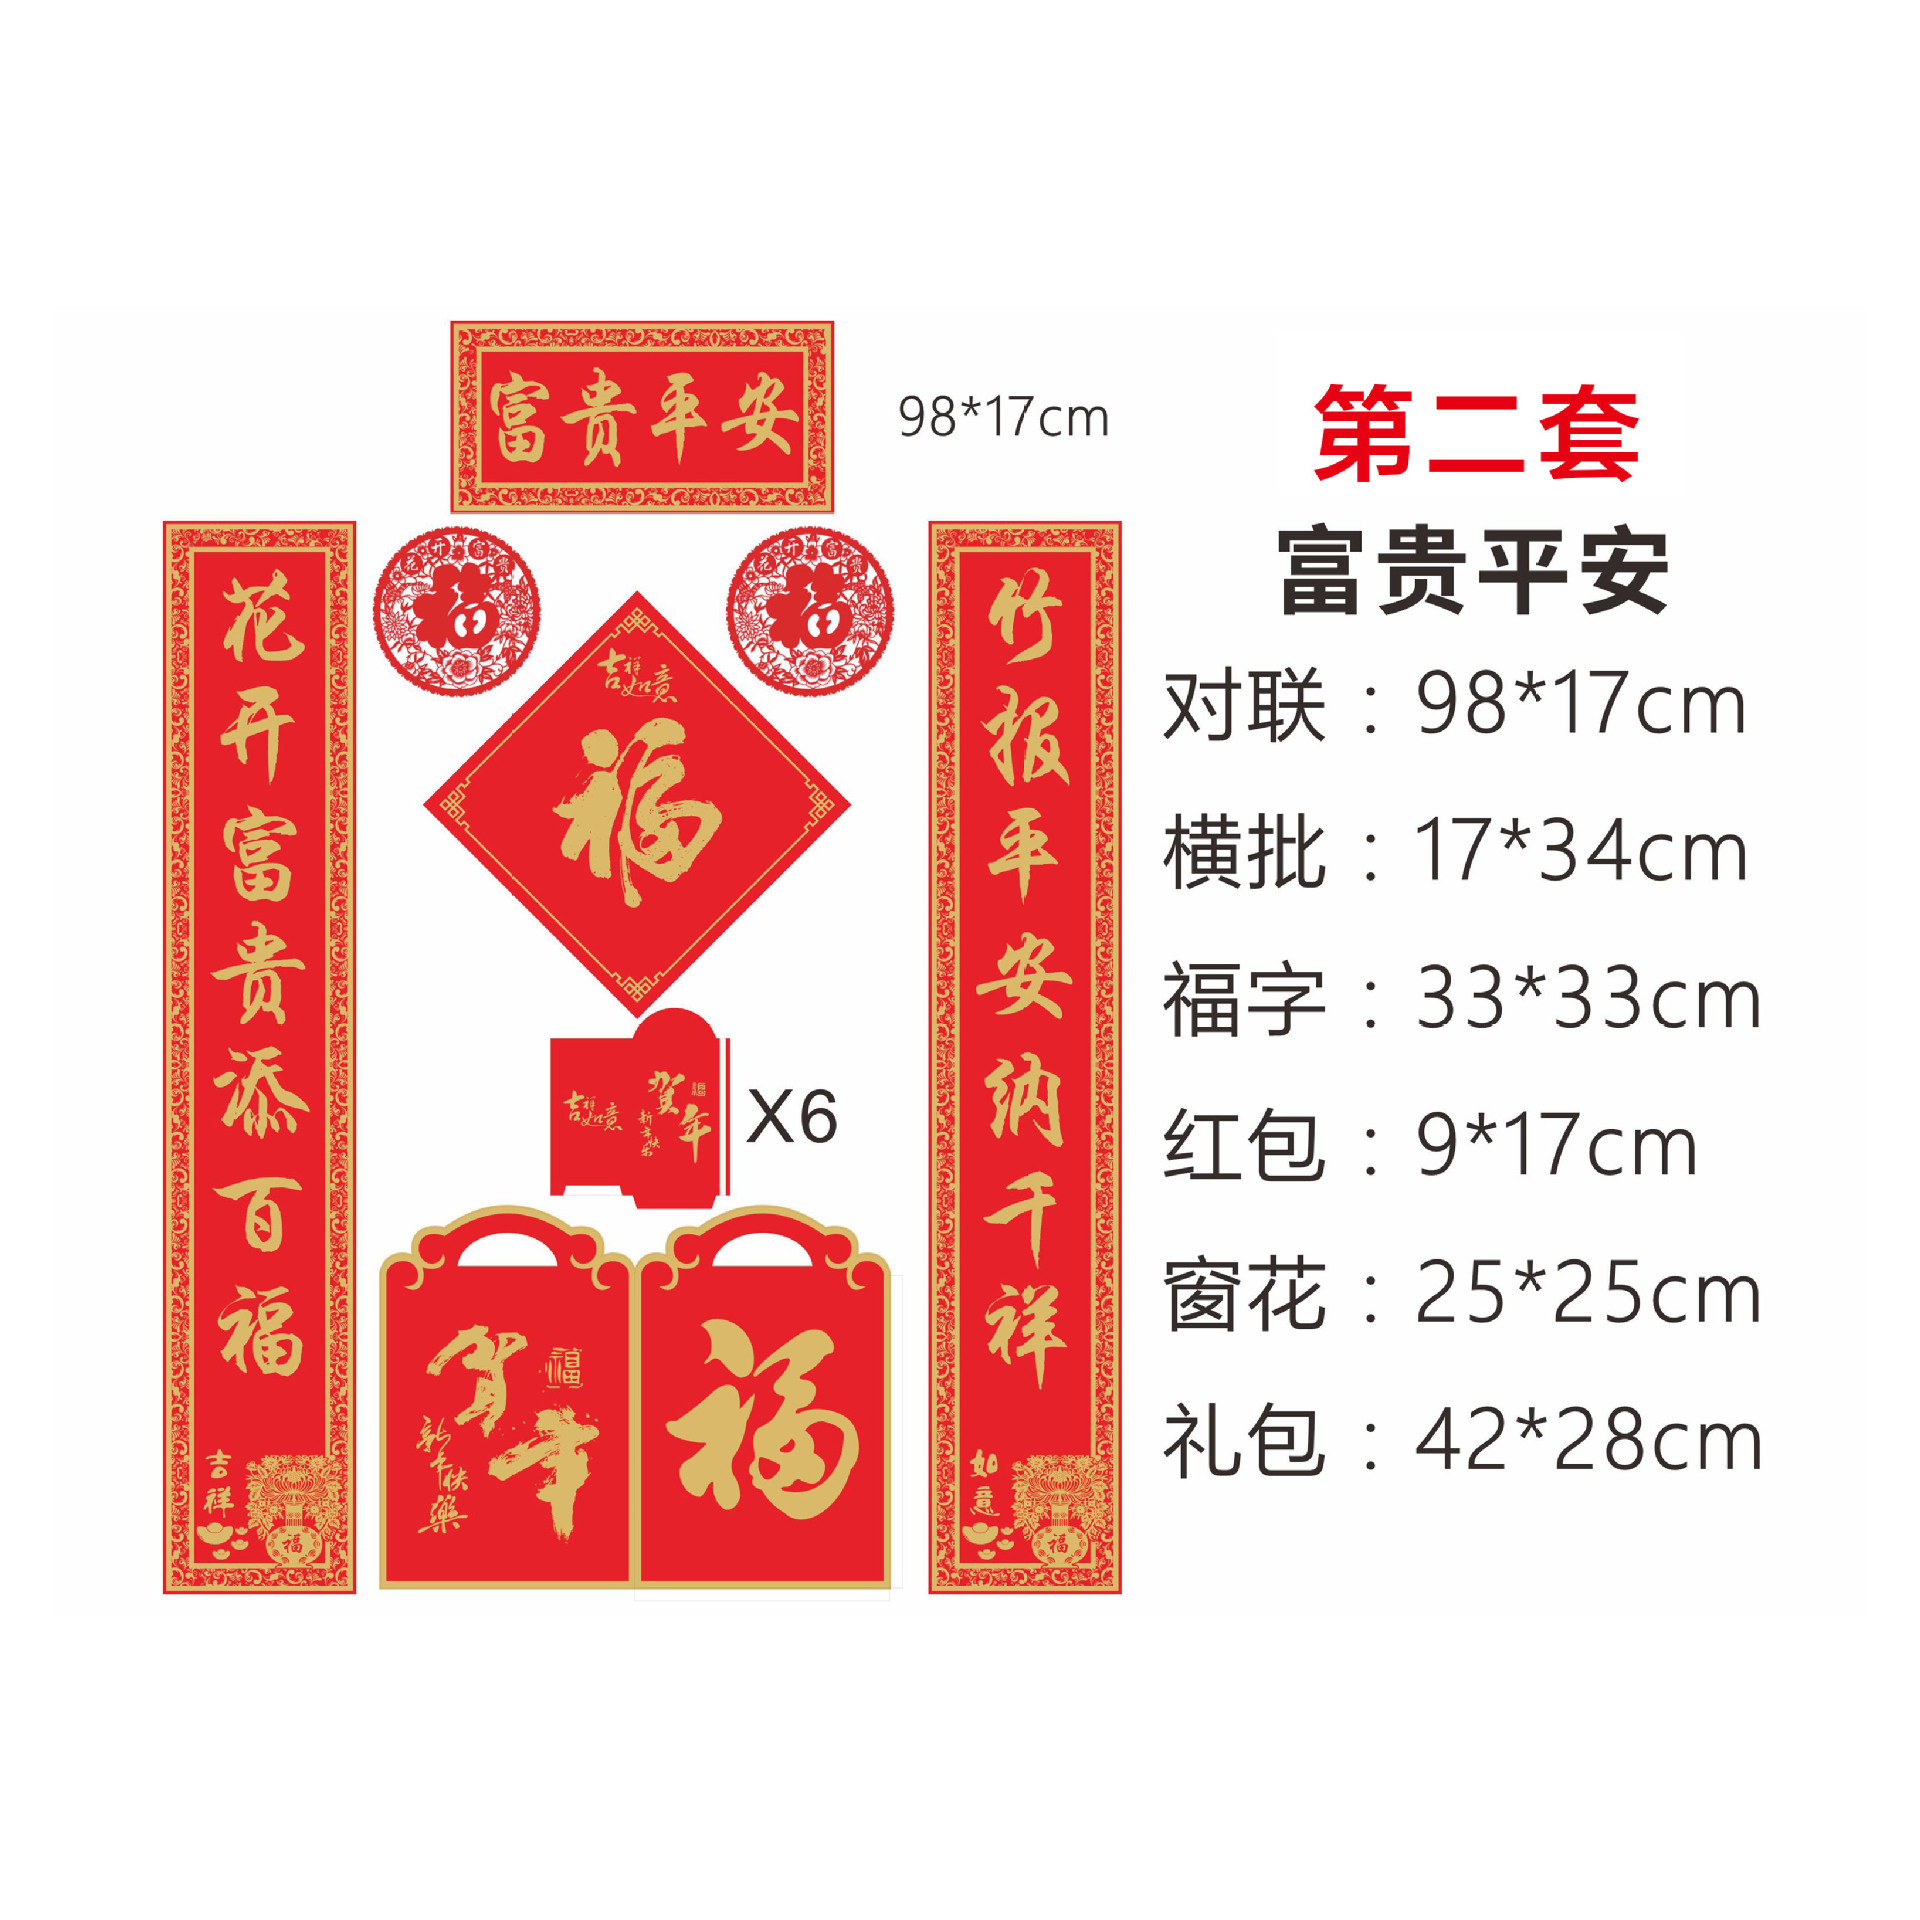 2024 Dragon Year Couplet Wholesale Gilding New Year Couplet Gift Bag Printing Fu Word Red Envelope Company Enterprise New Year Couplet Gift Set